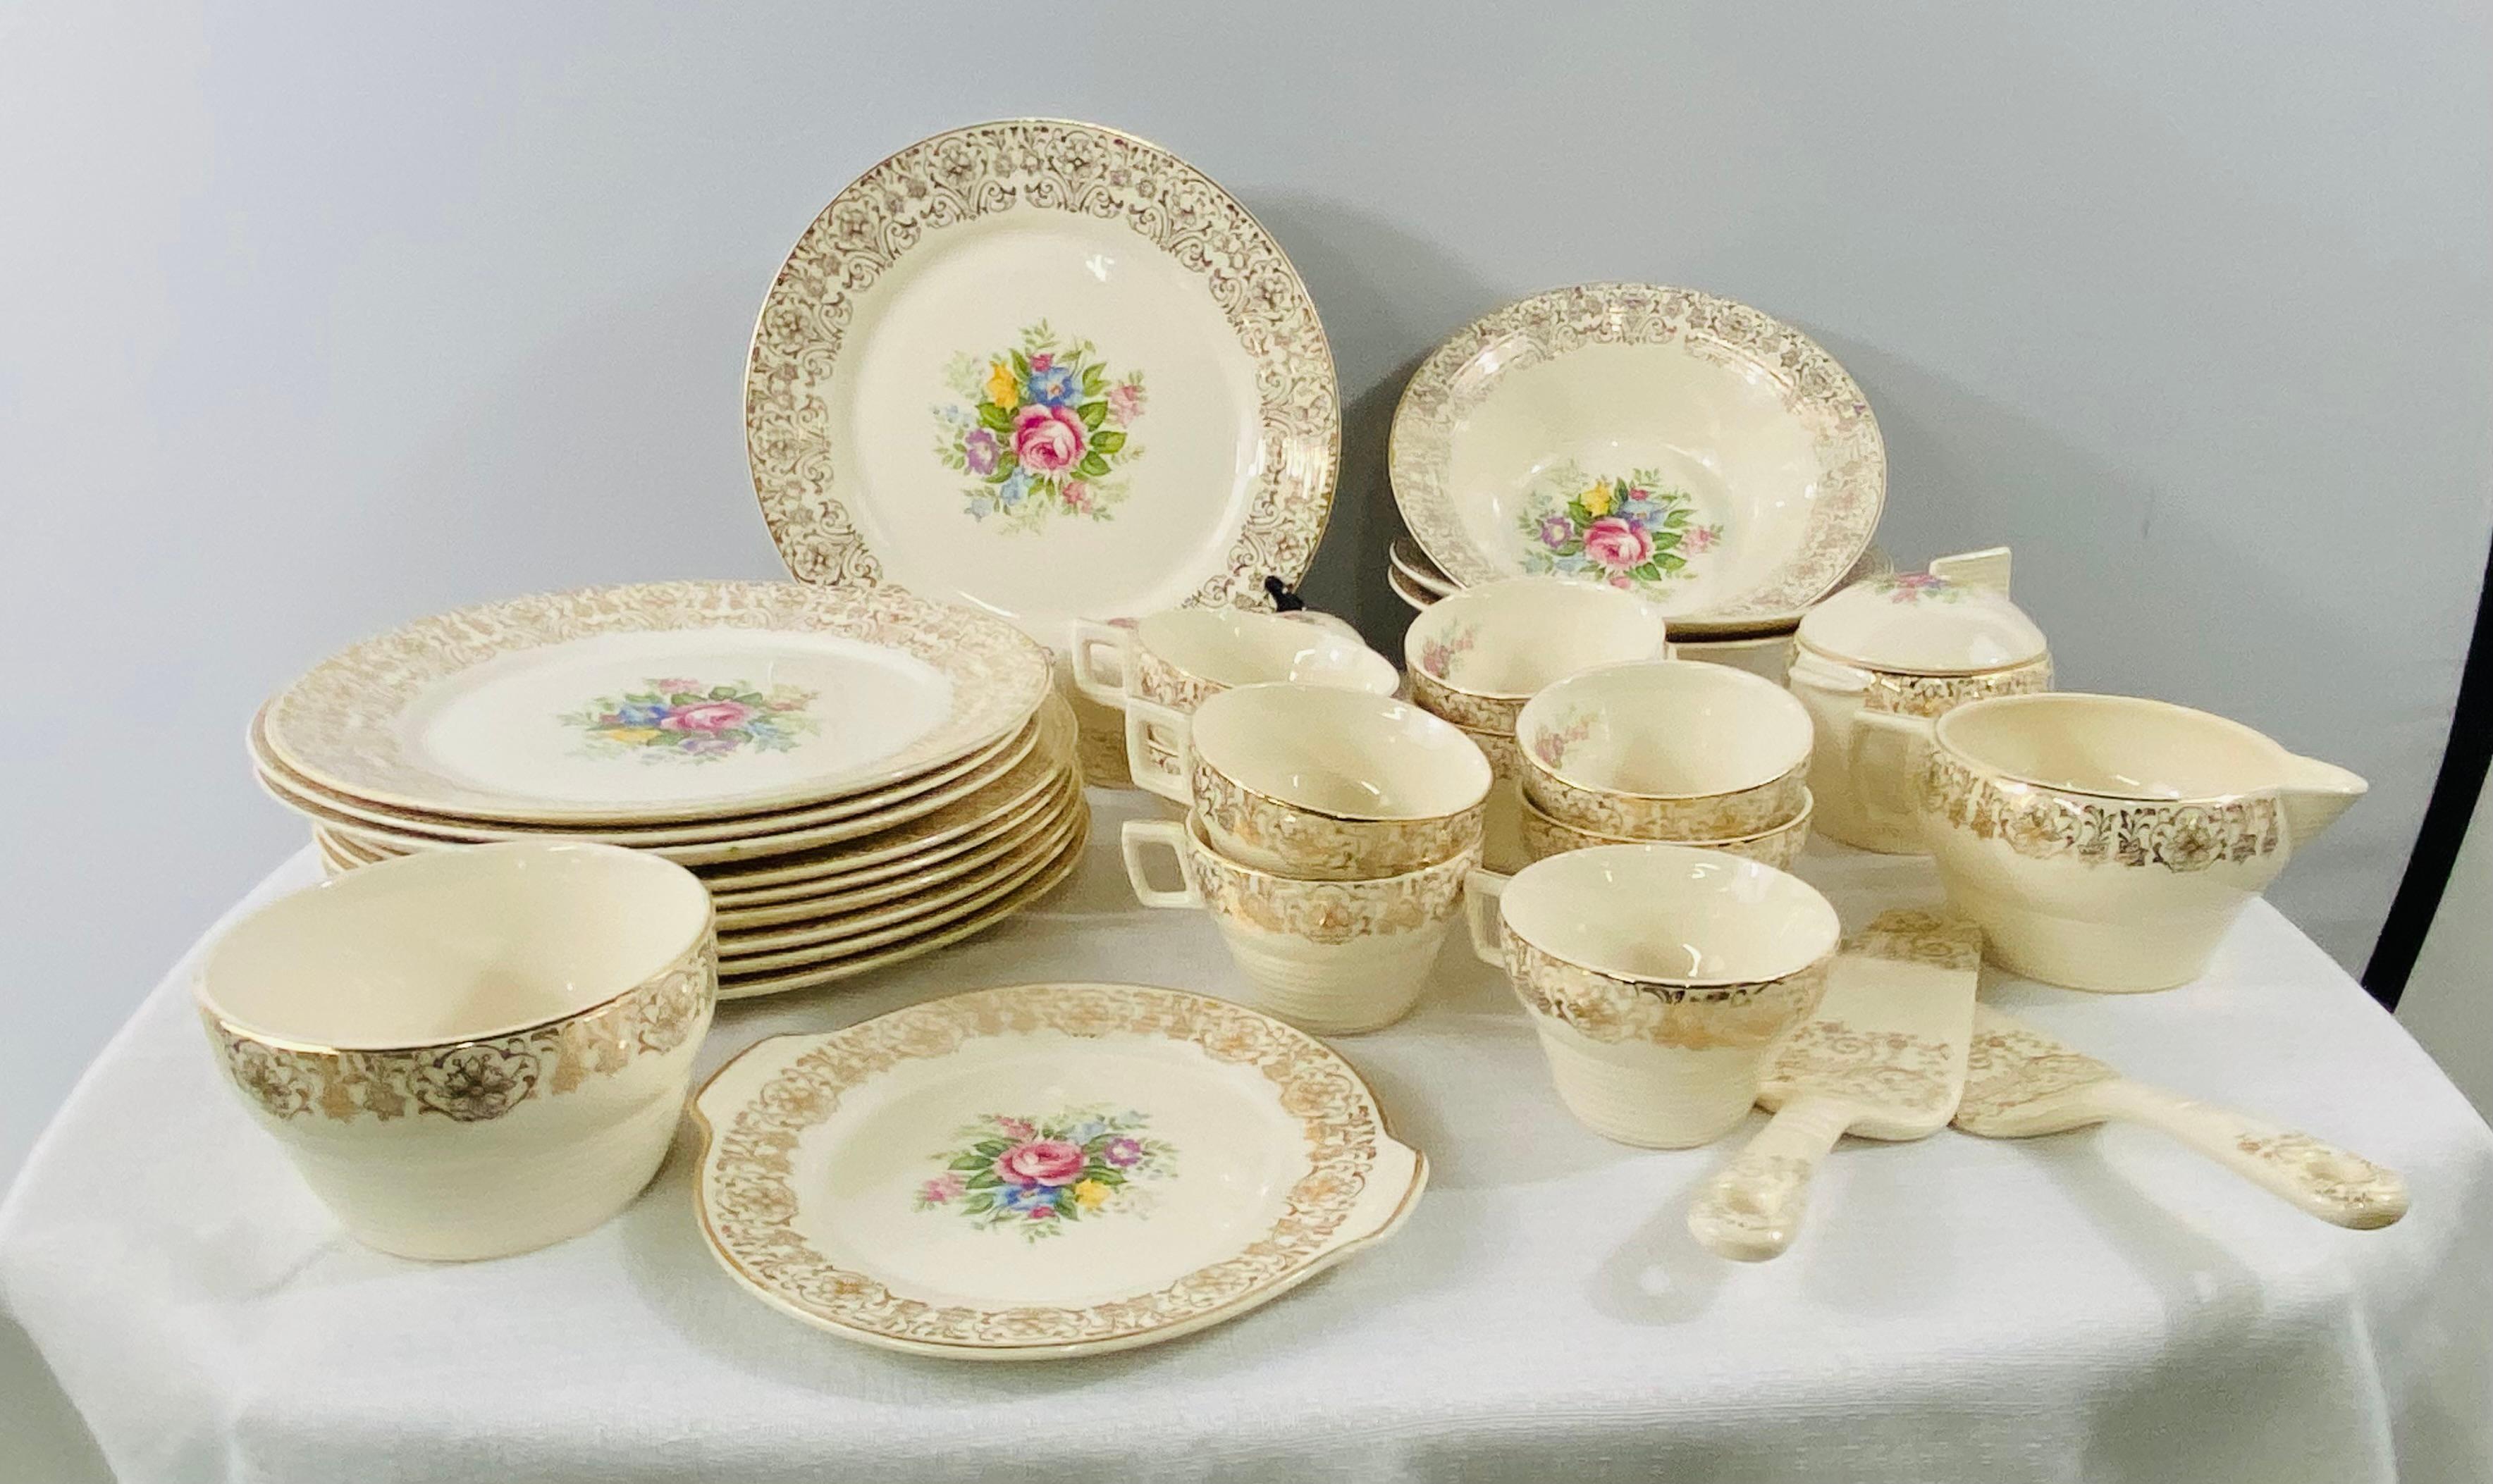 A timeless Limoges tableware set of 30 Pieces stamped Triumph, made in the USA Limoges Rosalie 1 T S 350-1 22 carat gold. Each piece is finely made of porcelain and hand painted in 22 carat gold with floral color design . The set is a mix of various